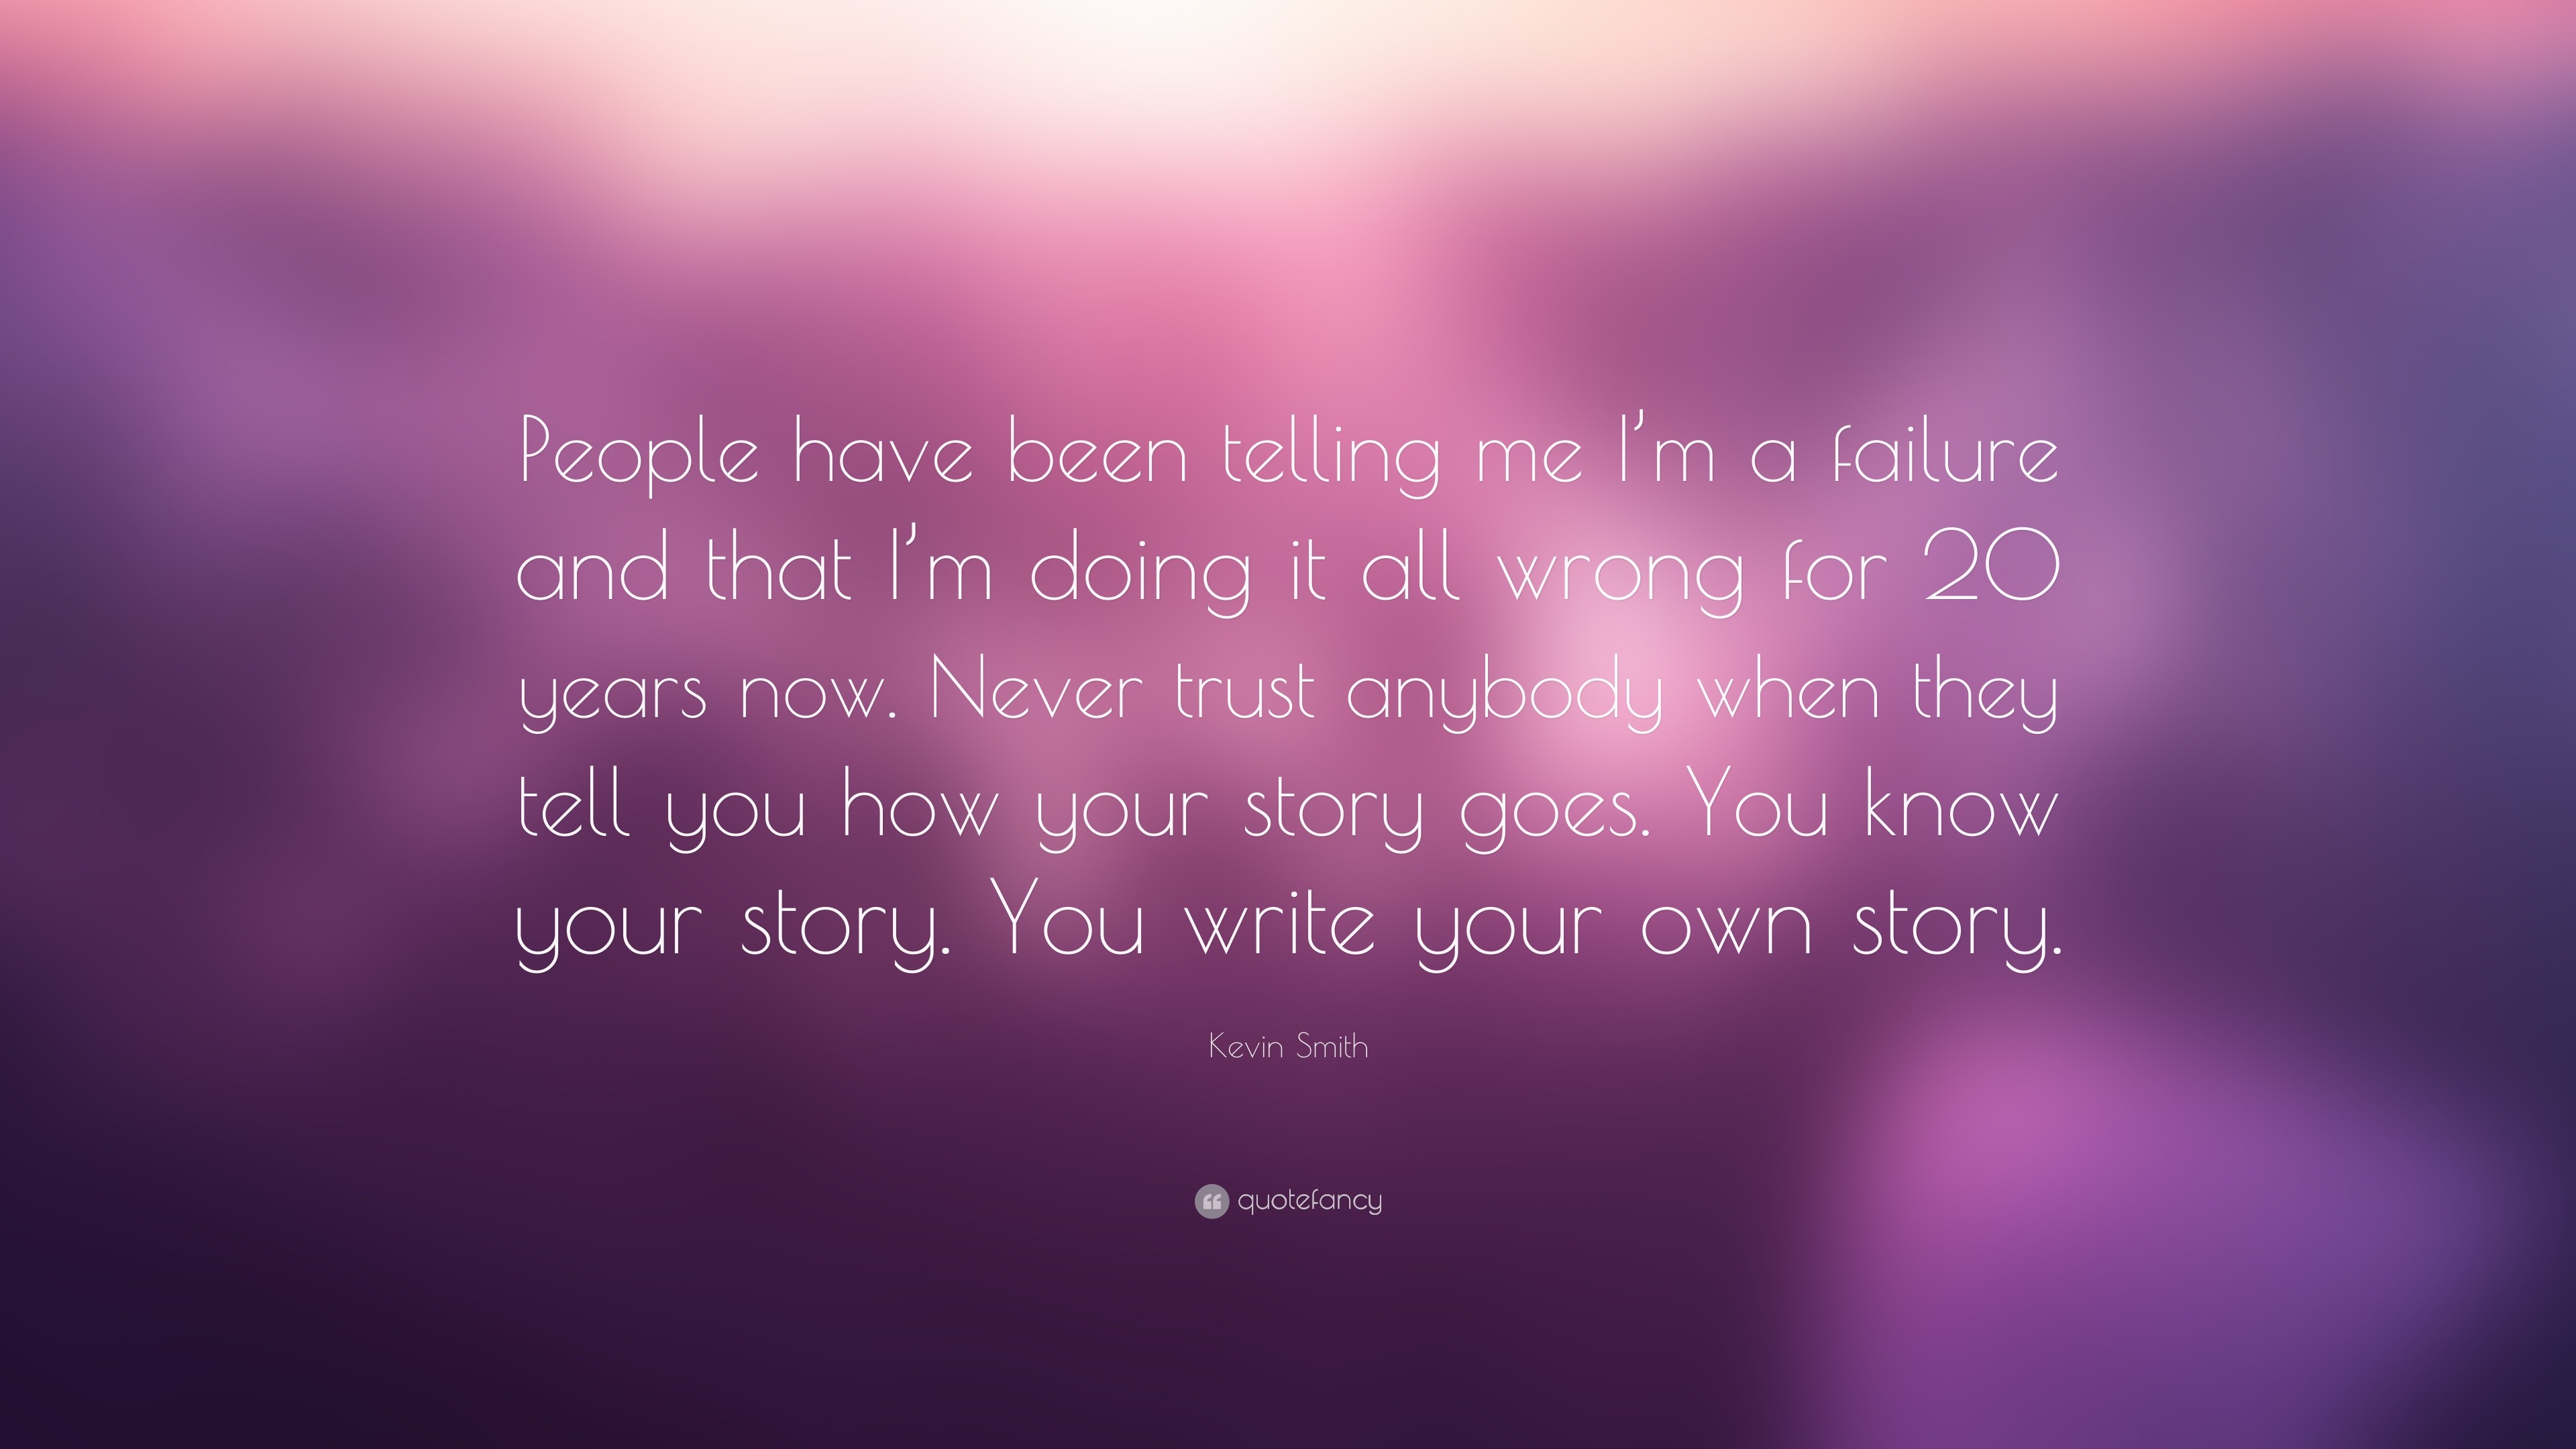 Kevin Smith Quote: “People have been telling me I’m a failure and that ...